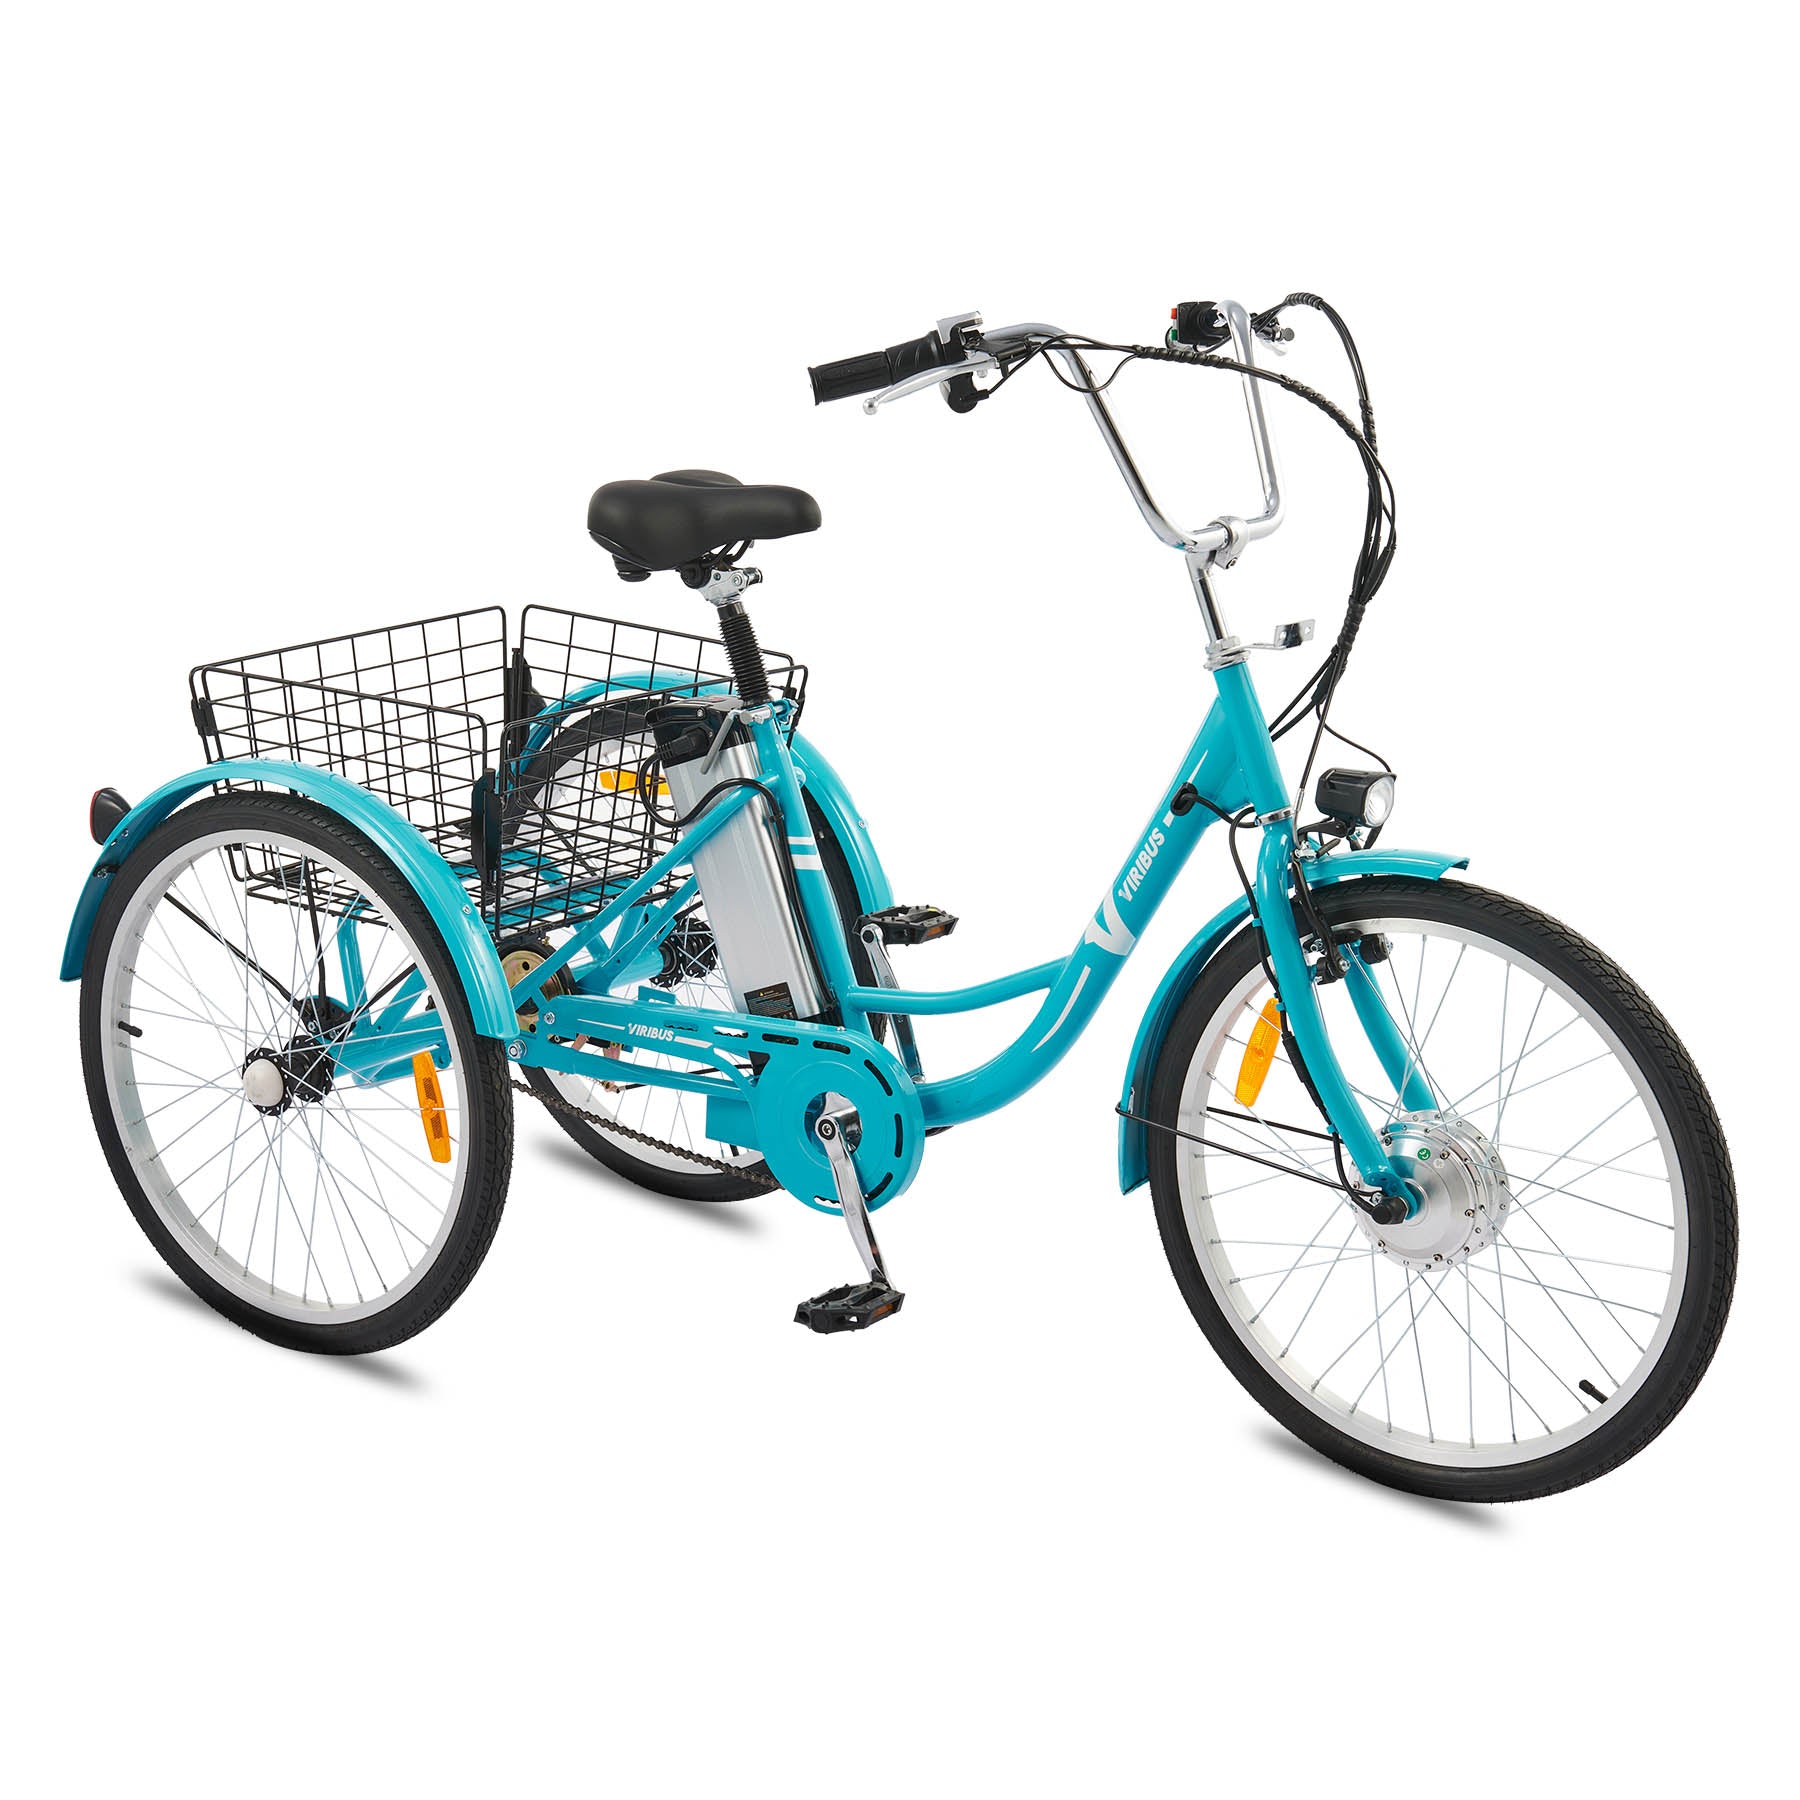 Experience the Best Electric Tricycle for Adults with Viribus Trio